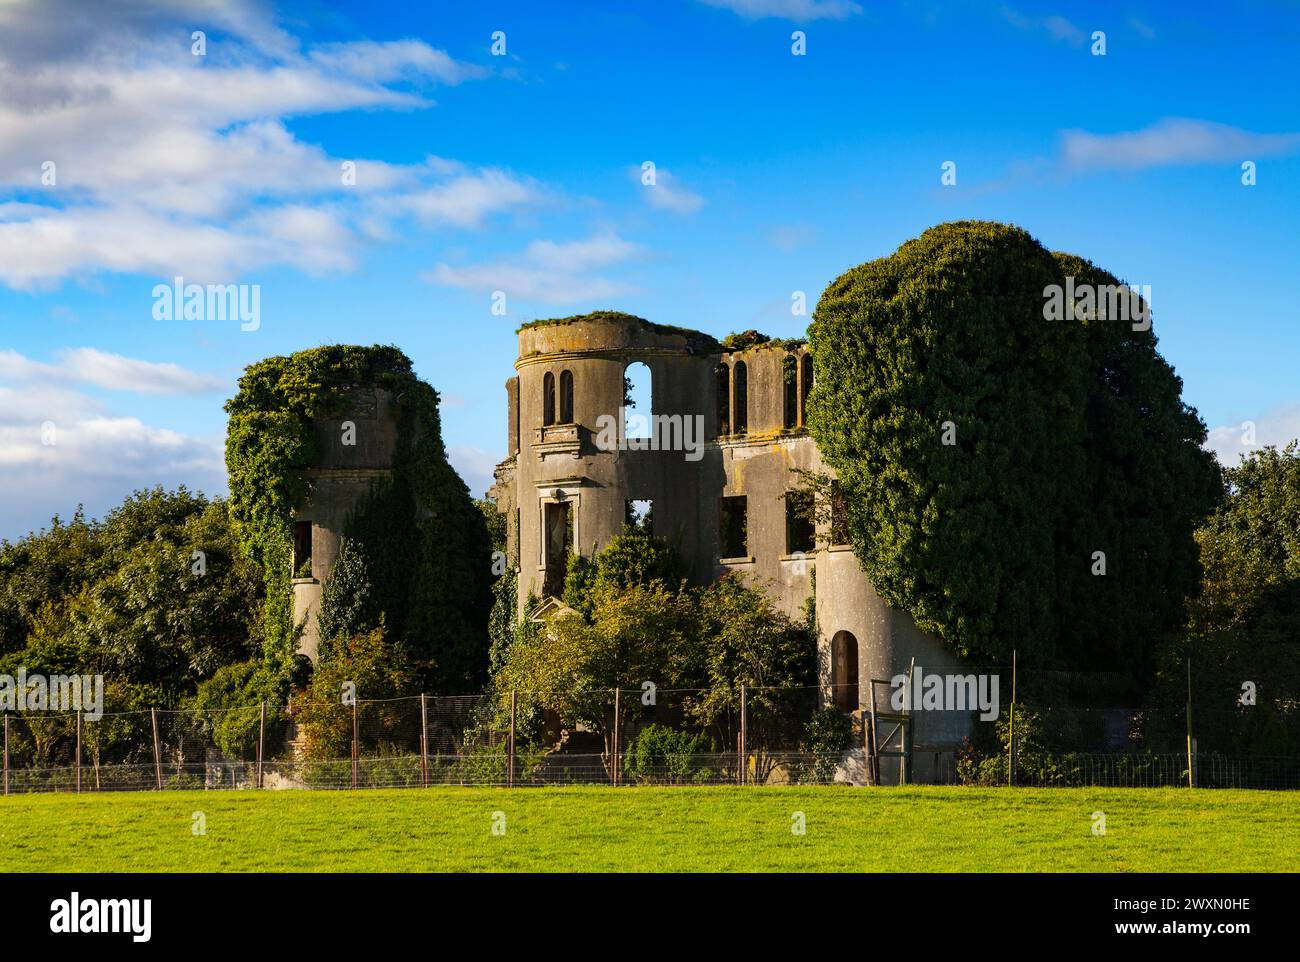 18th Century Arch Hall, now a ruin in the fields of County Meath, near Wilkinstown, Ireland. Stock Photo